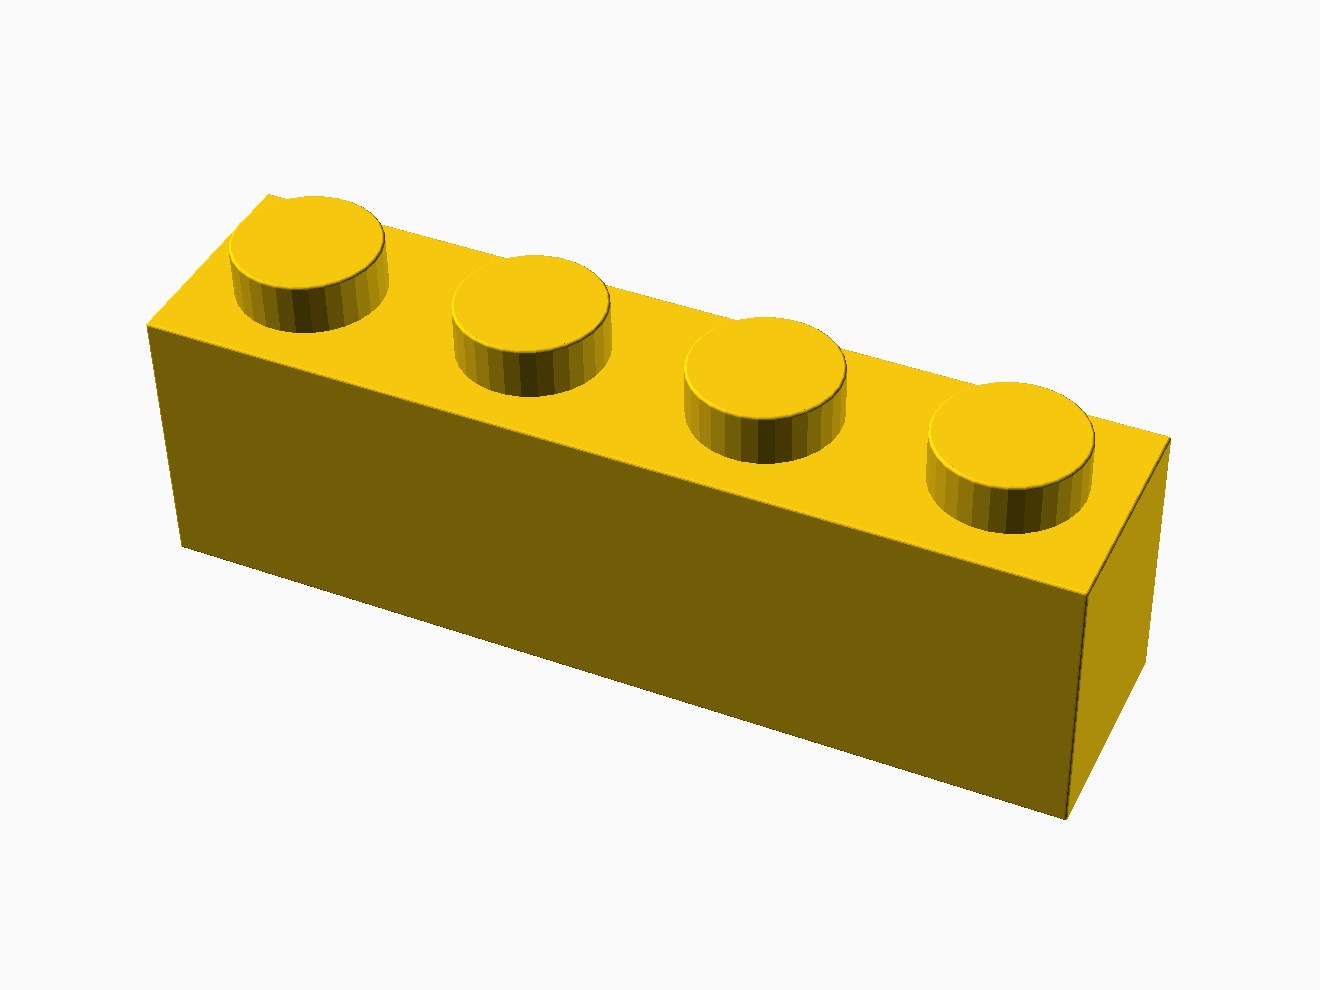 3D printable model of a LEGO 4x1 Brick with standard knobs.